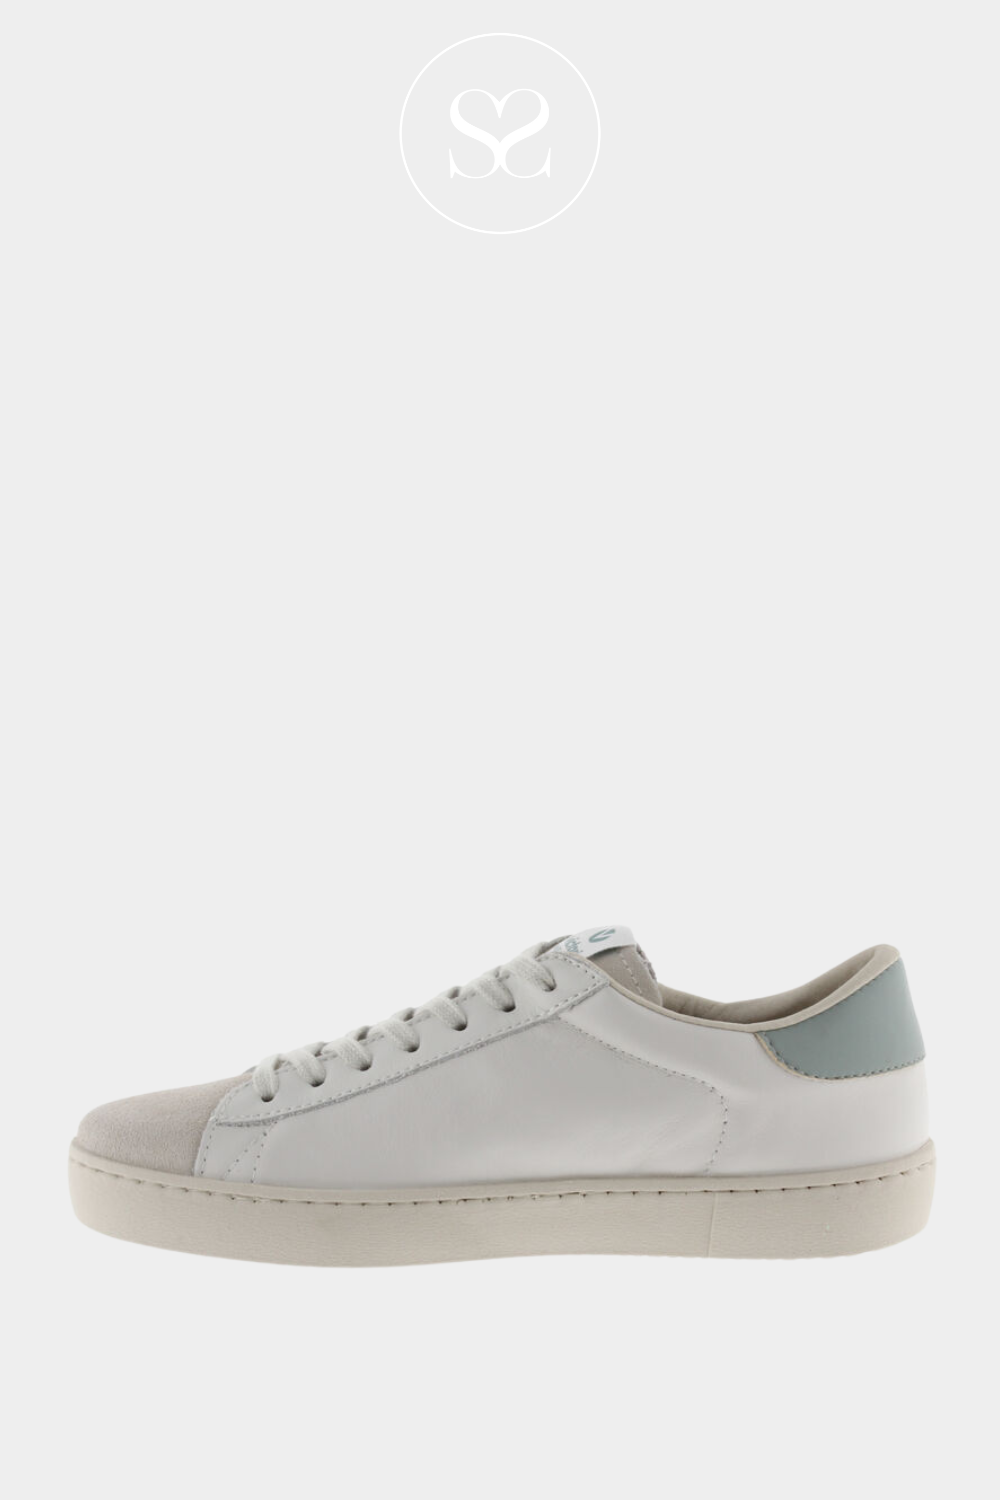 VICTORIA 126142 WHITE FLAT TRAINERS WITH LACES AND SUEDE TOE. SAGE V ON THE SIDE. VEJA STYLE